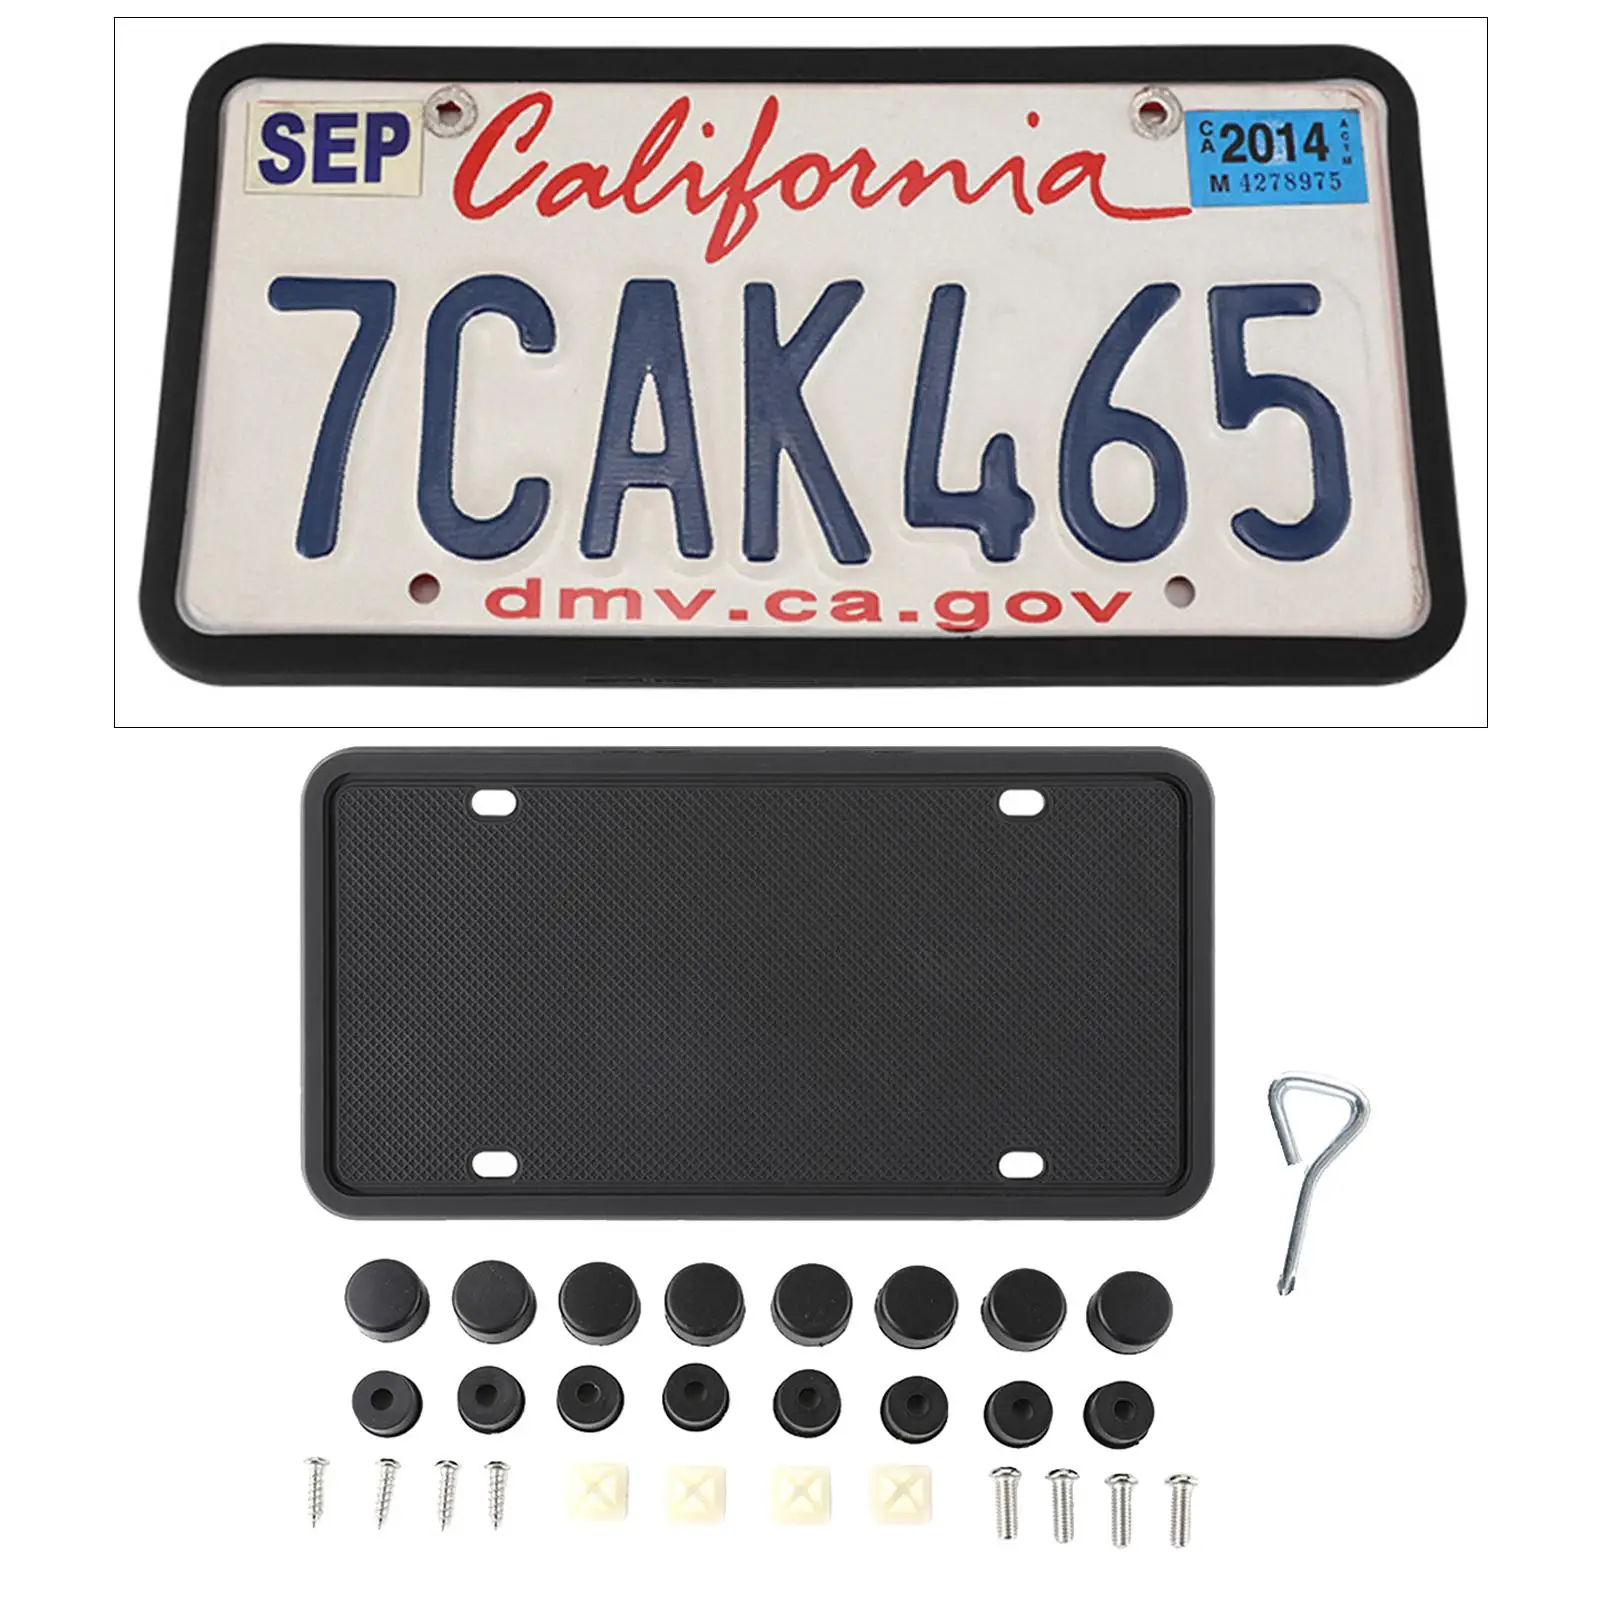 Silicone License Plate Frames, Car License Plate Cover,  License Plate Bracket Holder. Rust-Proof, Rattle-Proof, Weather-Proof